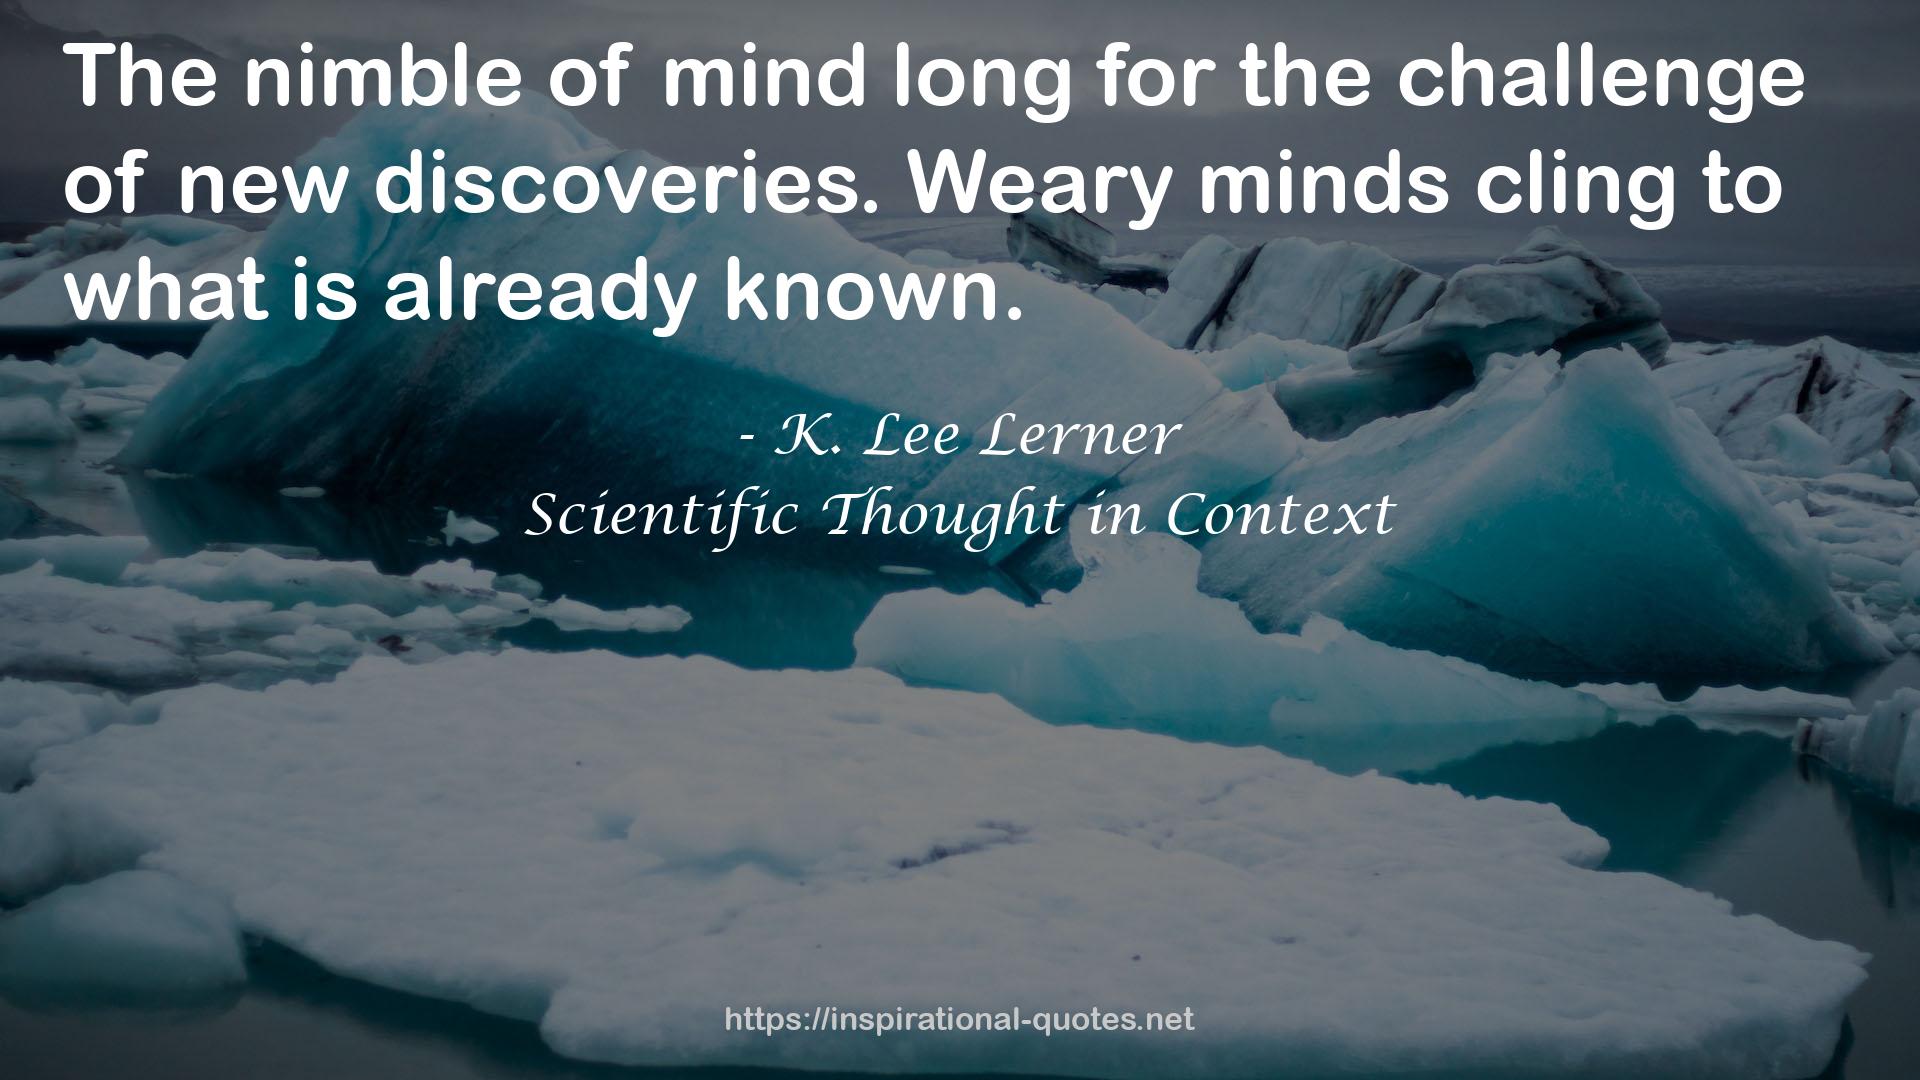 Scientific Thought in Context QUOTES